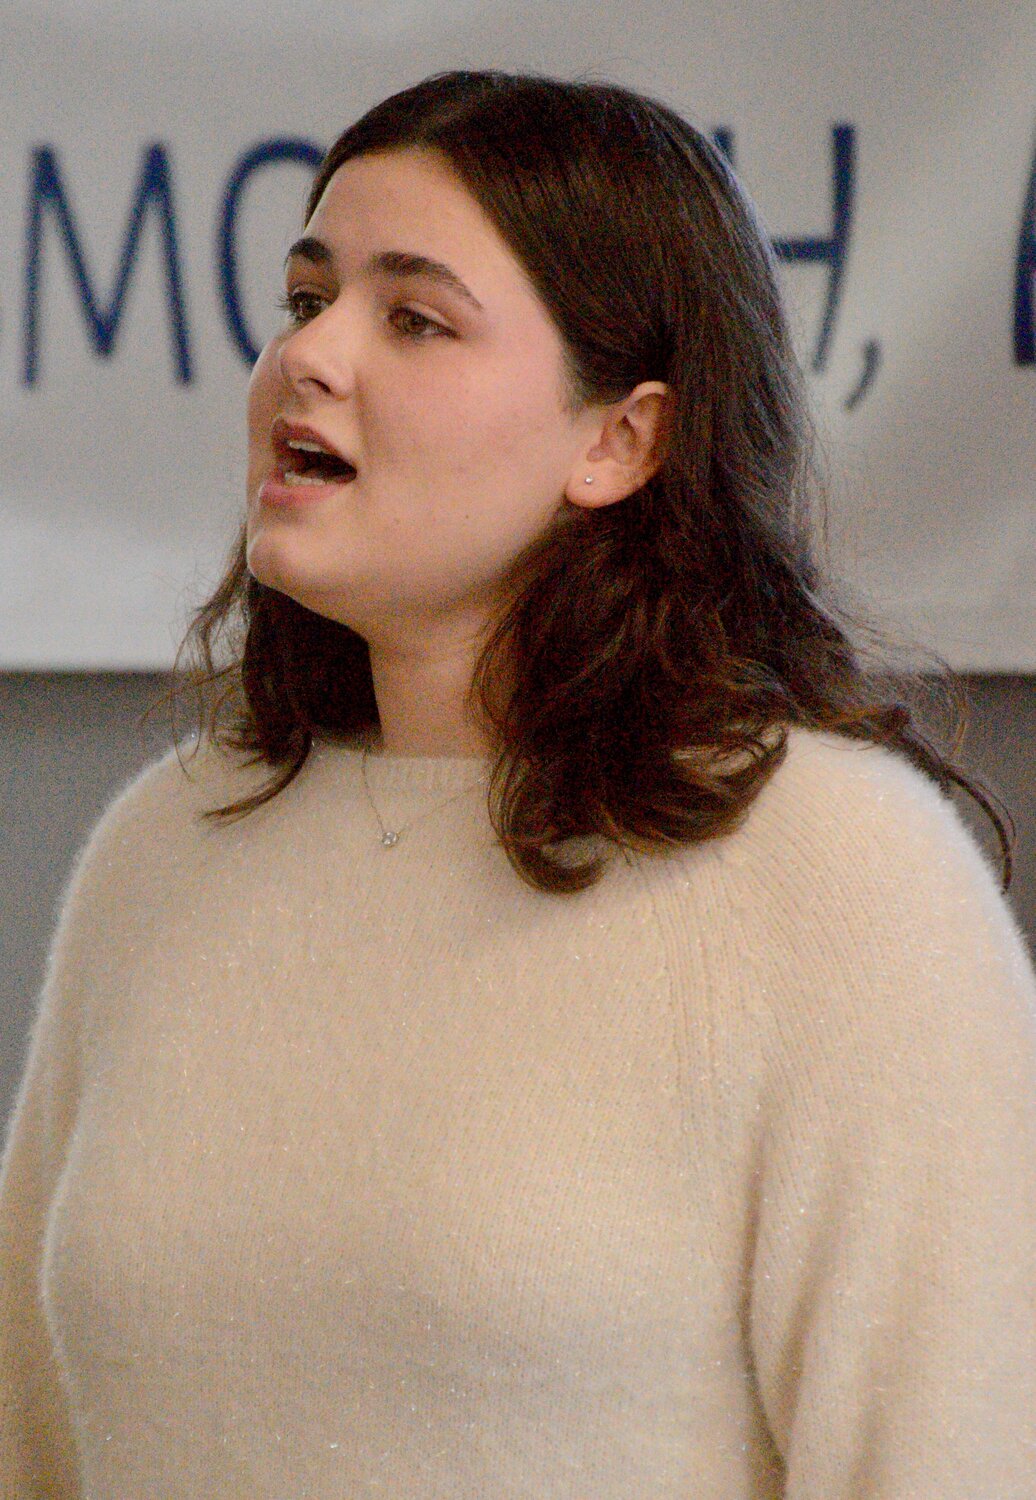 Addison Aleicho, a member of the Portsmouth High School Vocal Ensemble, sings The National Anthem at the start of the ceremony.